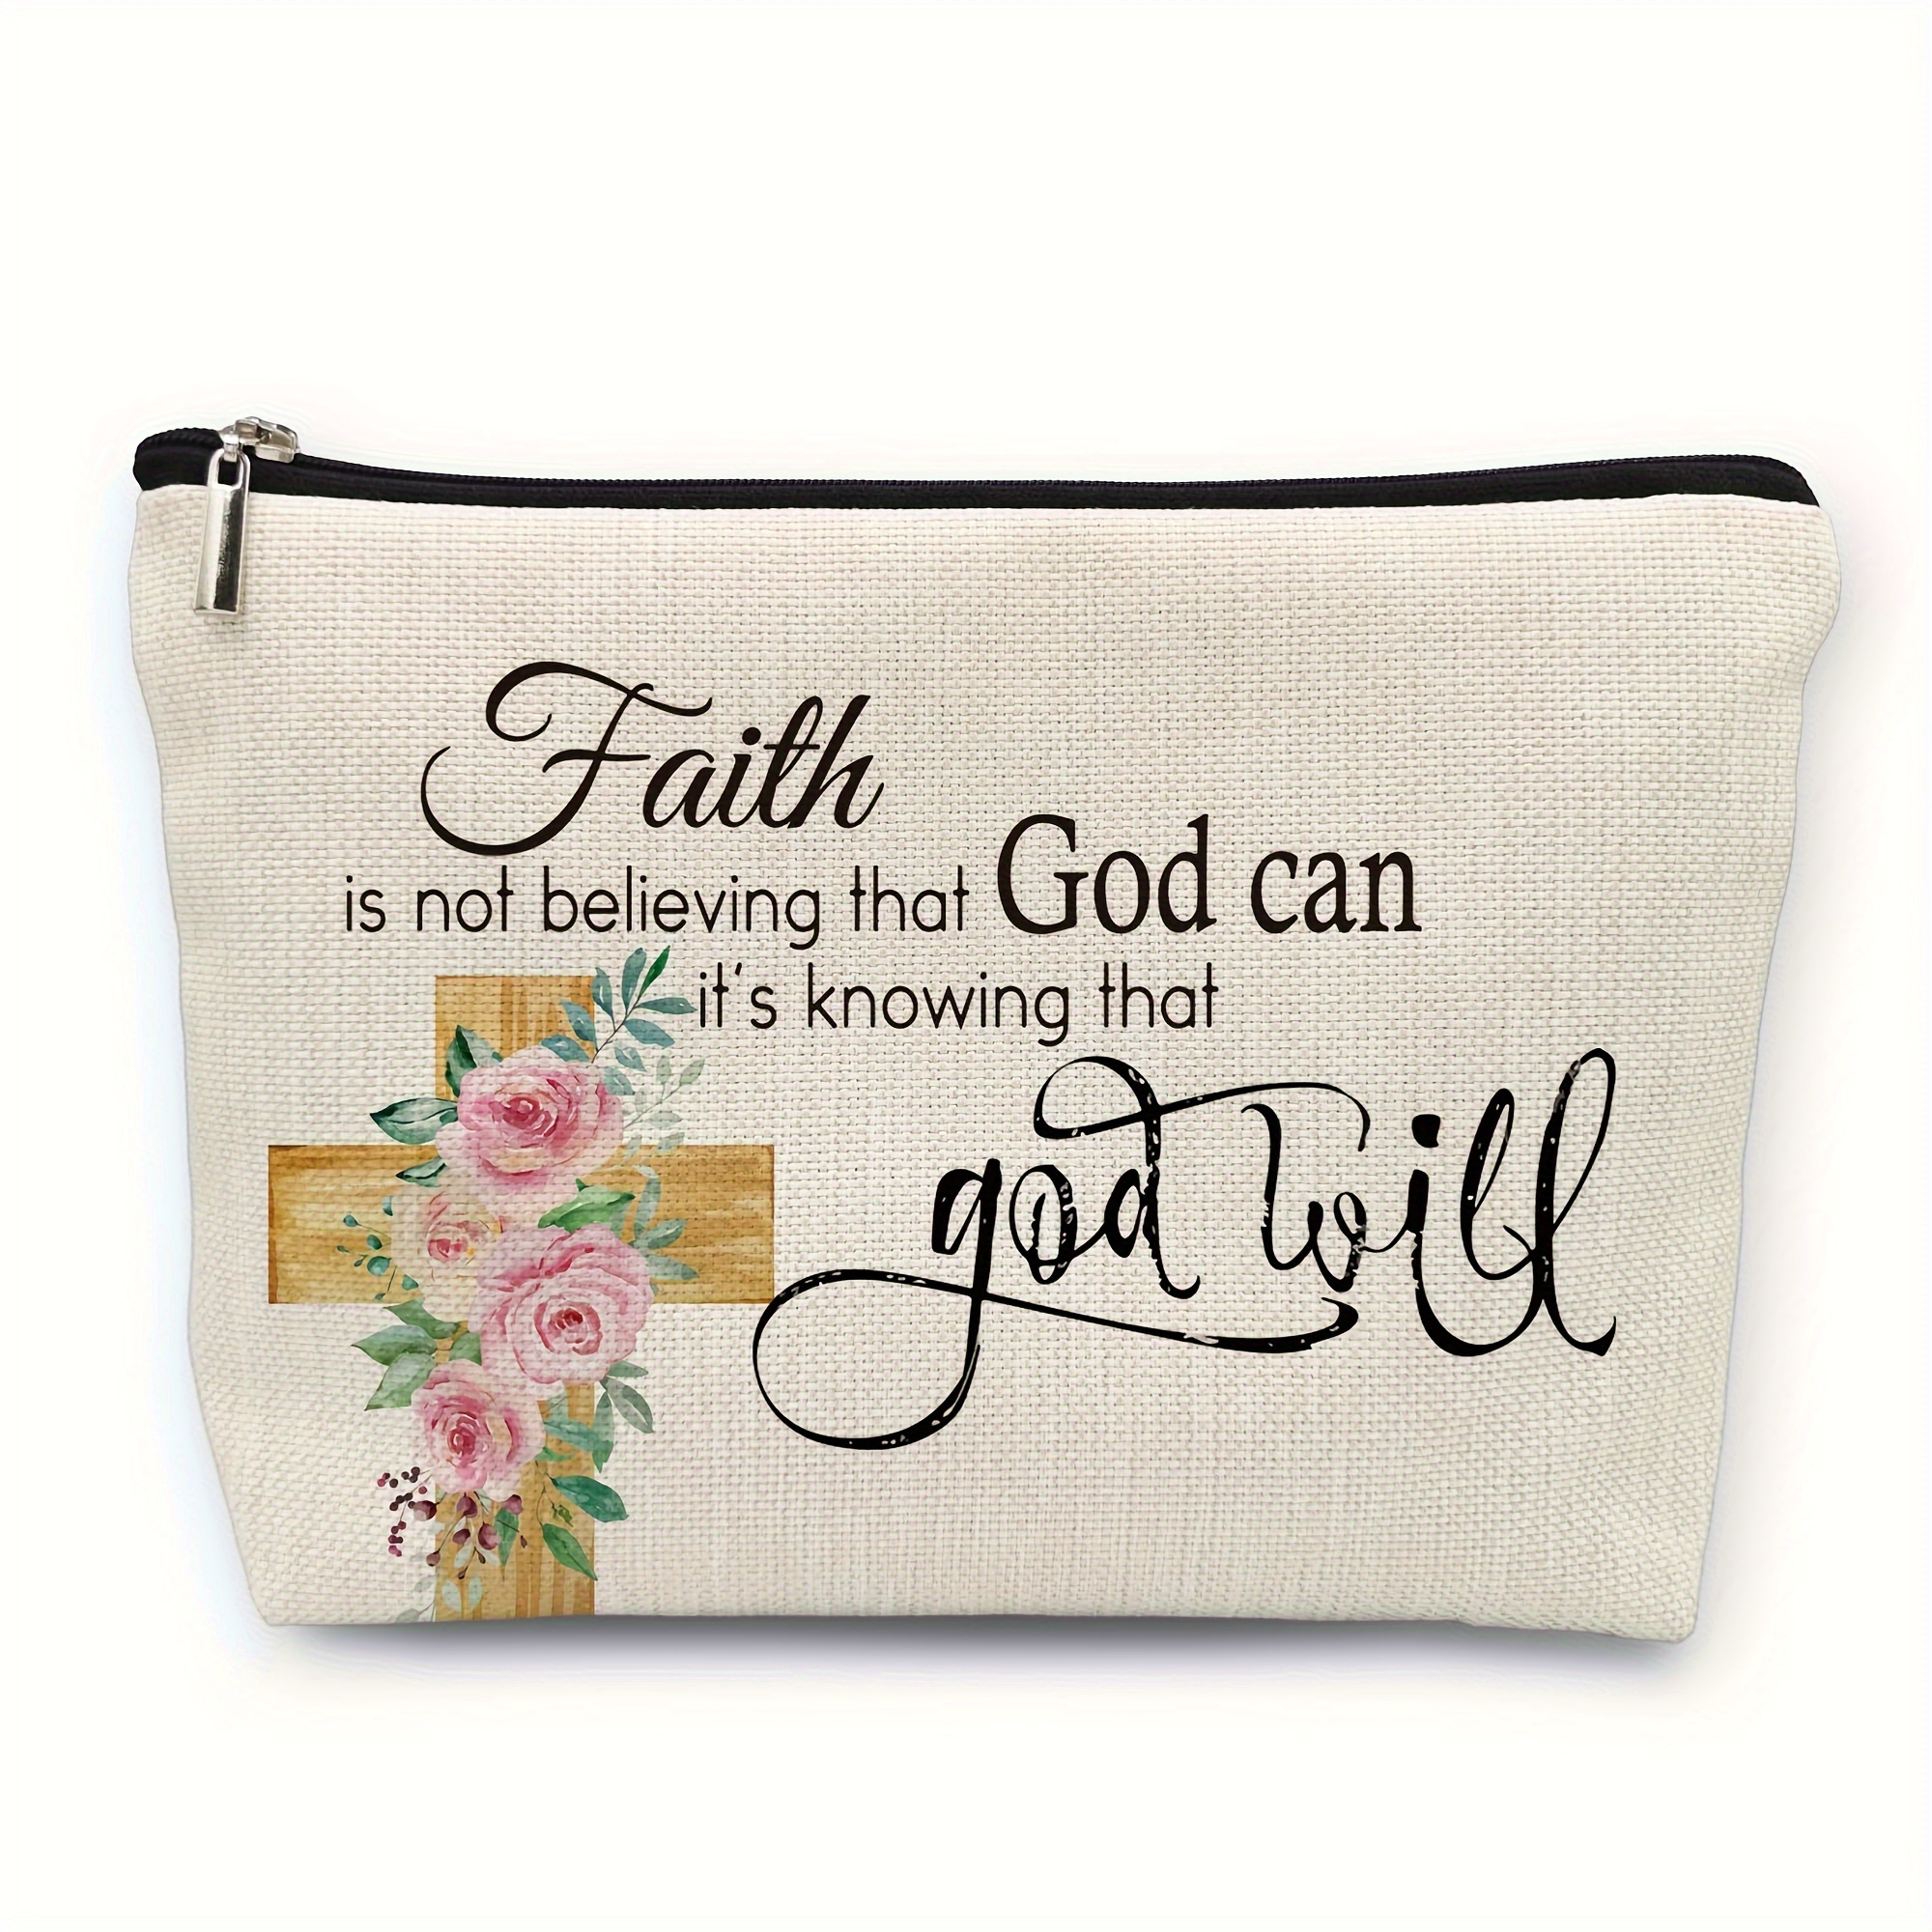 

Christian Gifts For Women, Christian Makeup Bag, Religious Christian Bible Verses Floral Make Up Cosmetic Bag, Cosmetic Bags Travel Makeup Pouch Christian Gifts For Purse Women Mom